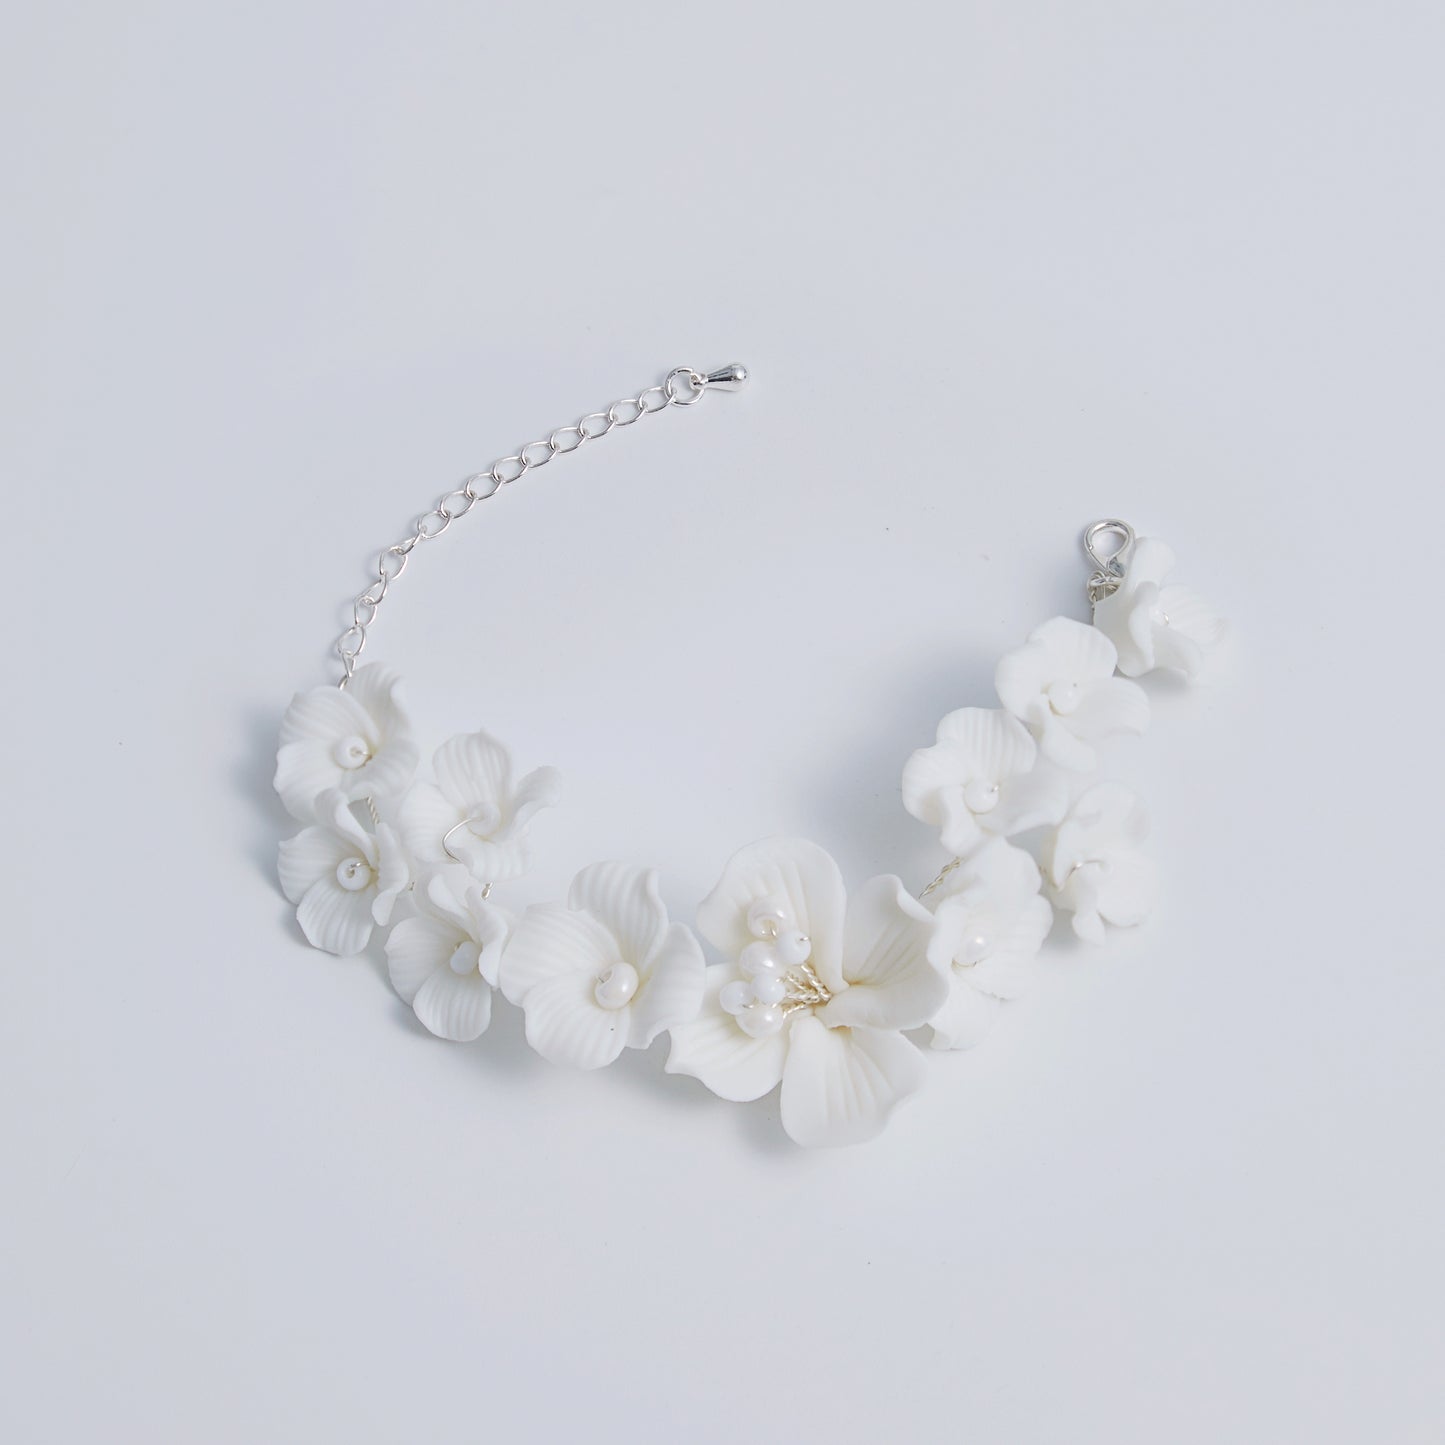 This beautifully crafted porcelain bracelet features individually carved flowers and an impressively full and intricate design.